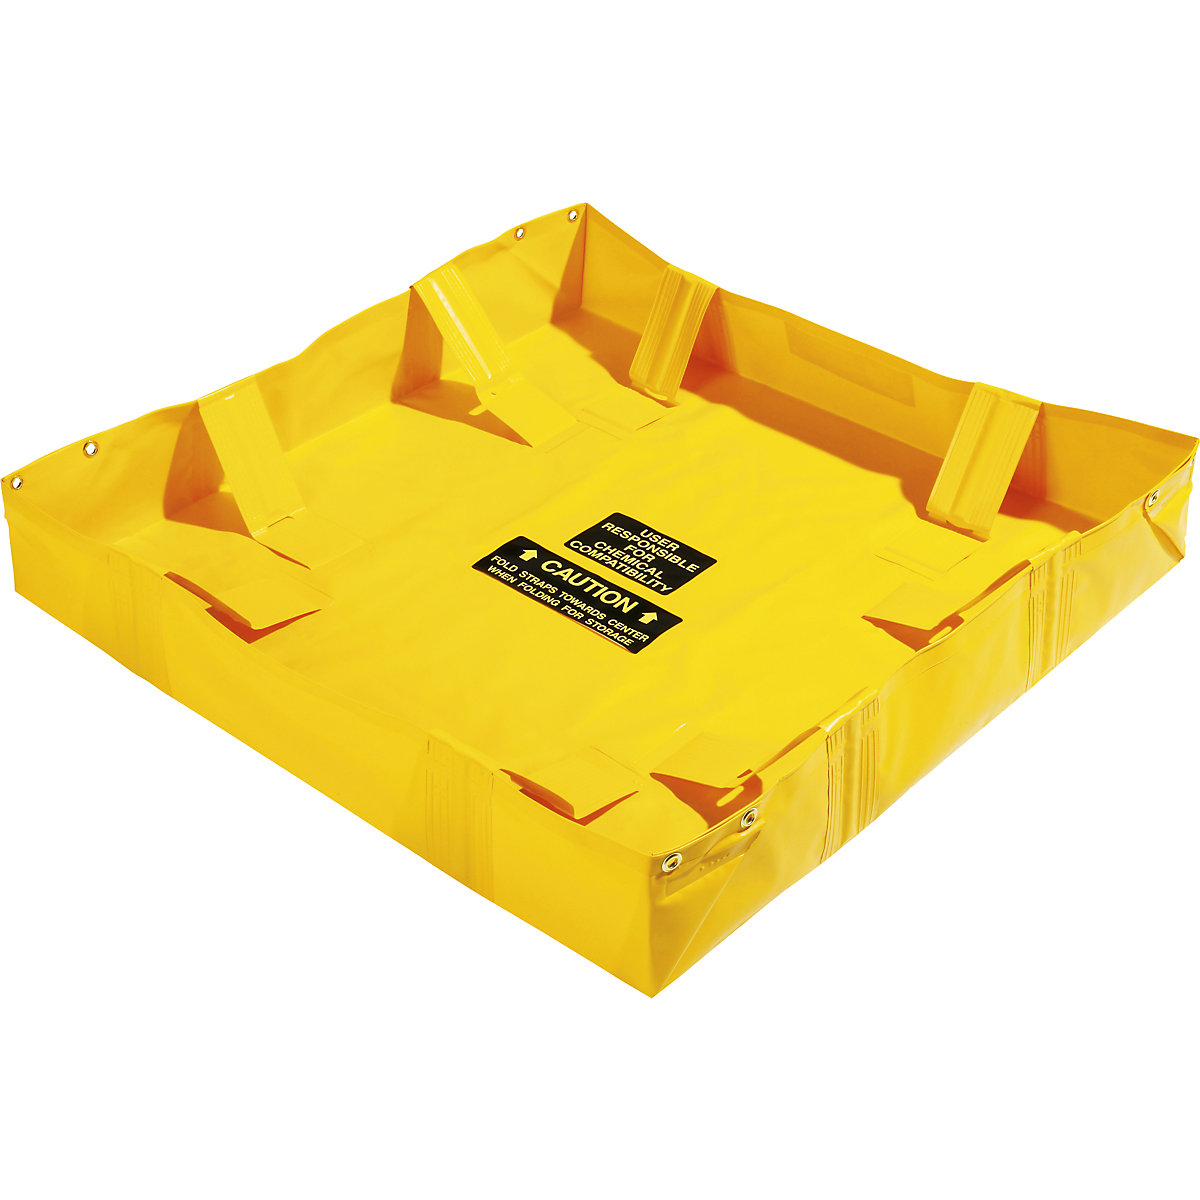 Collapse-A-Tainer® Lite emergency folding tray - PIG